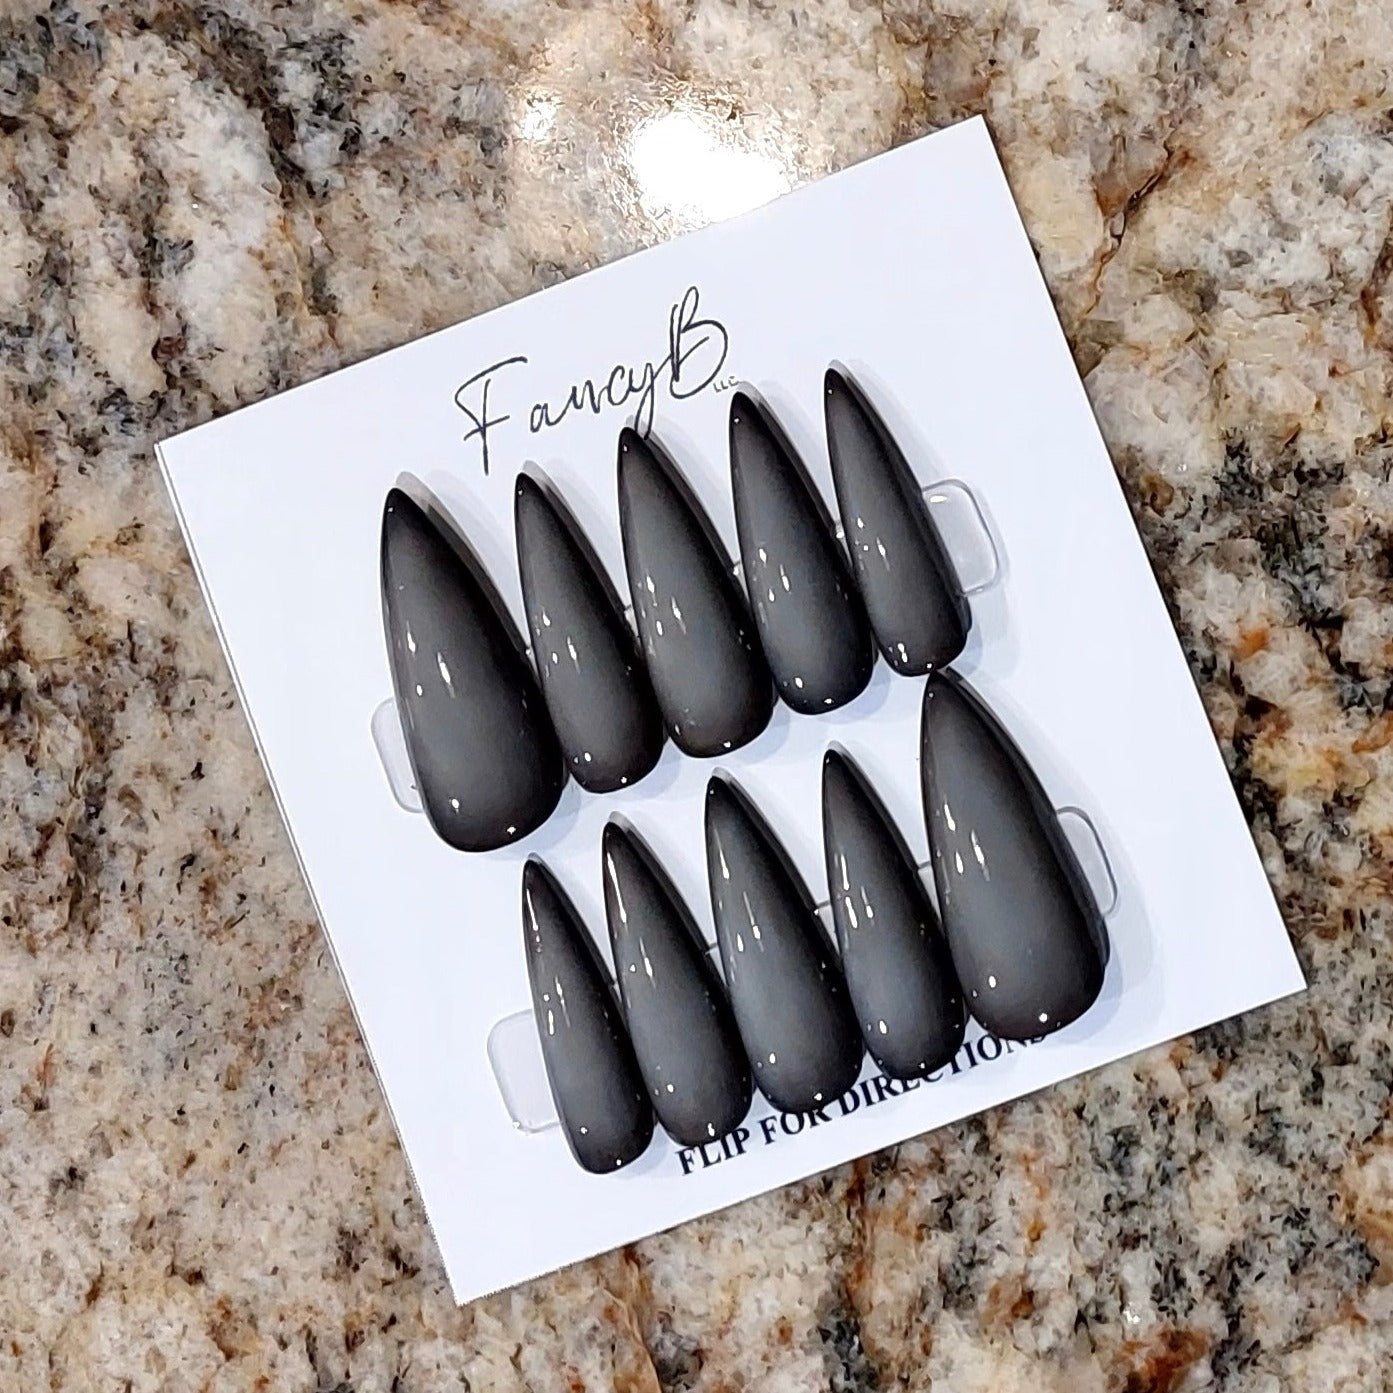 Custom press on nails, gothic themed edge ombre nails with light grey center and black fade edges. Perfect statement nails for the dark goth style lovers!